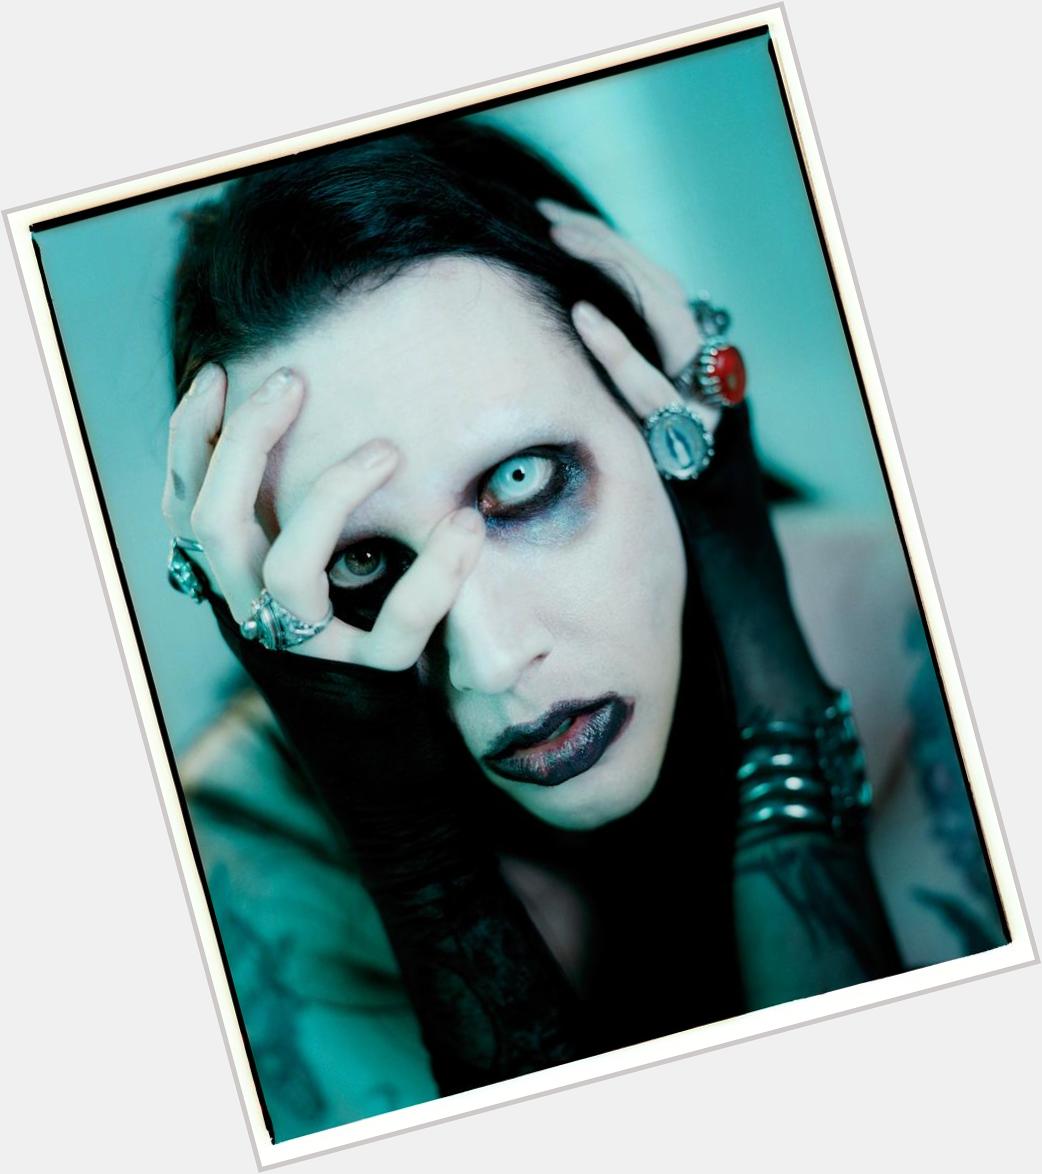 Today is the birthday of a great artist
Happy Birthday, Marilyn Manson!!      